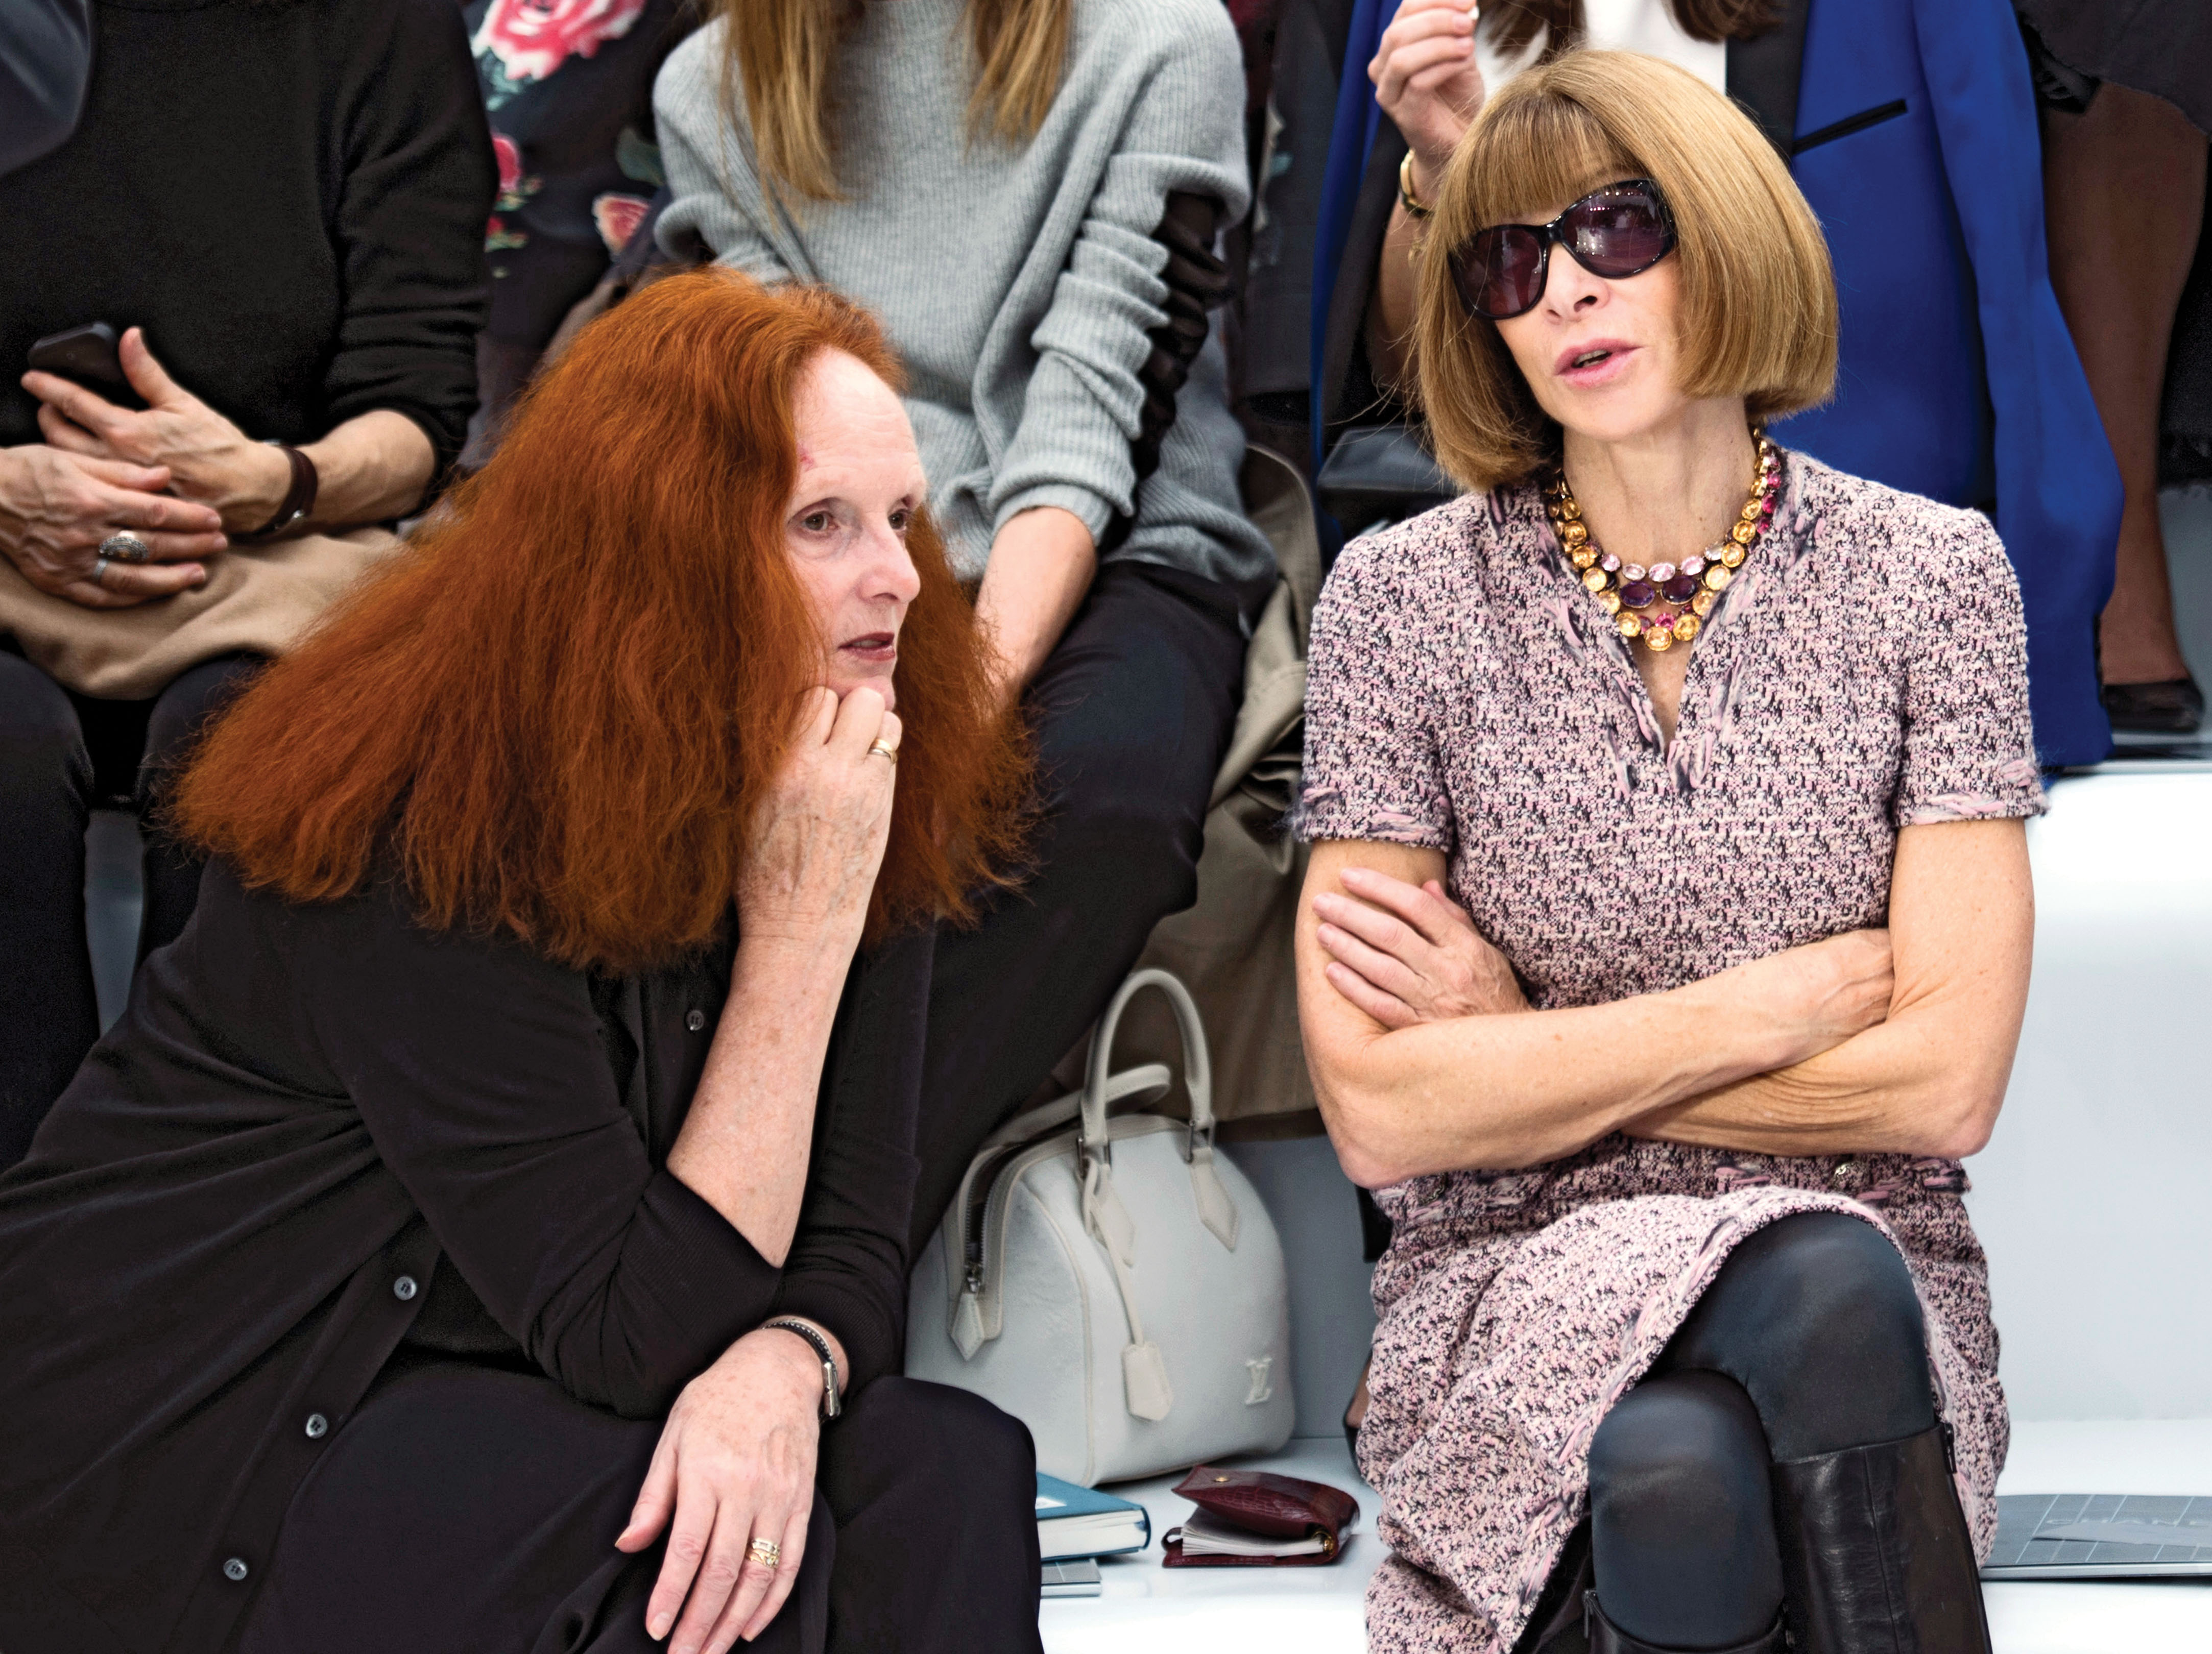 US Vogue's artistic director Grace Coddington (L) and US Vogue editor in chief Anna Wintour chat prior to the Chanel Spring/Summer 2013 ready-to-wear collection show on October 2, 2012 at the Grand Palais in Paris. AFP PHOTO/MARTIN BUREAU (Photo credit should read MARTIN BUREAU/AFP/GettyImages)